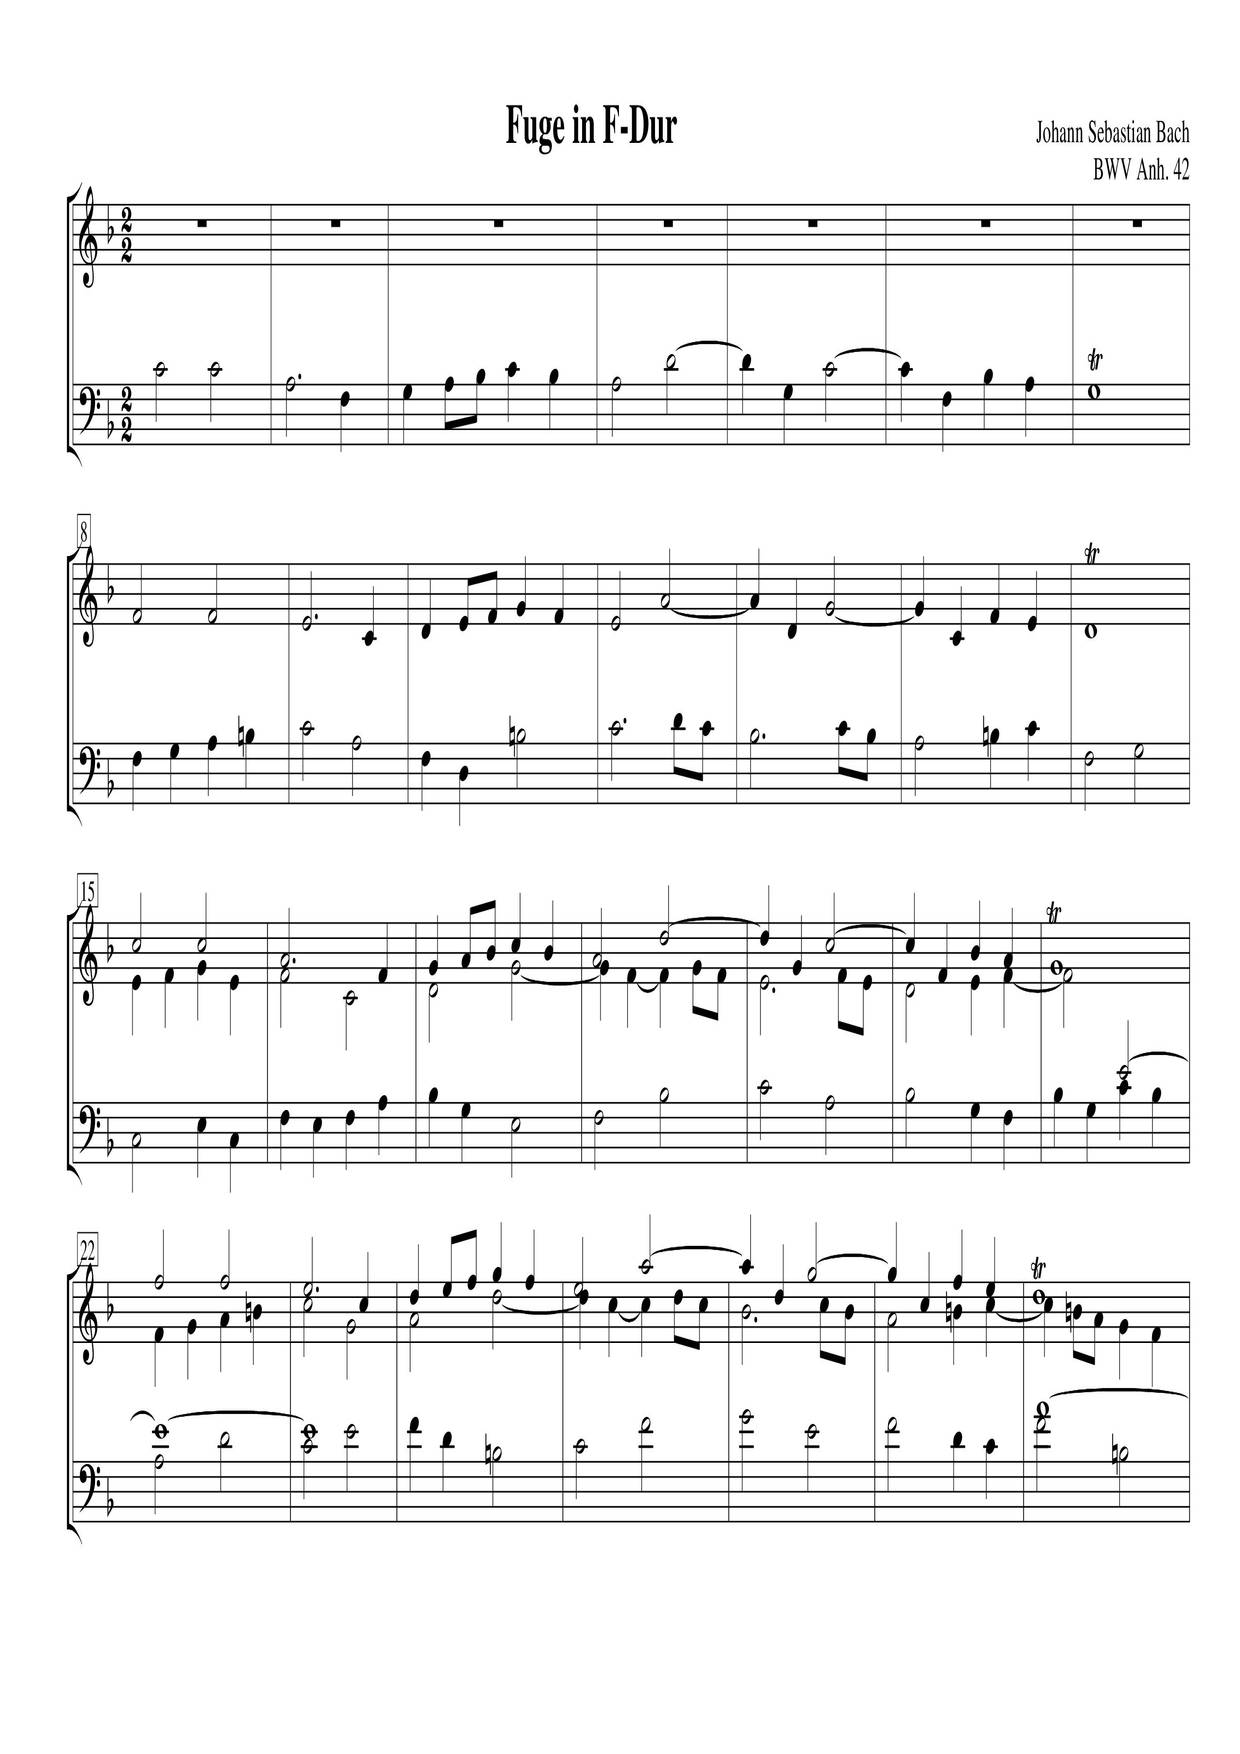 Fugue In F Major, BWV Anh. 42 Score